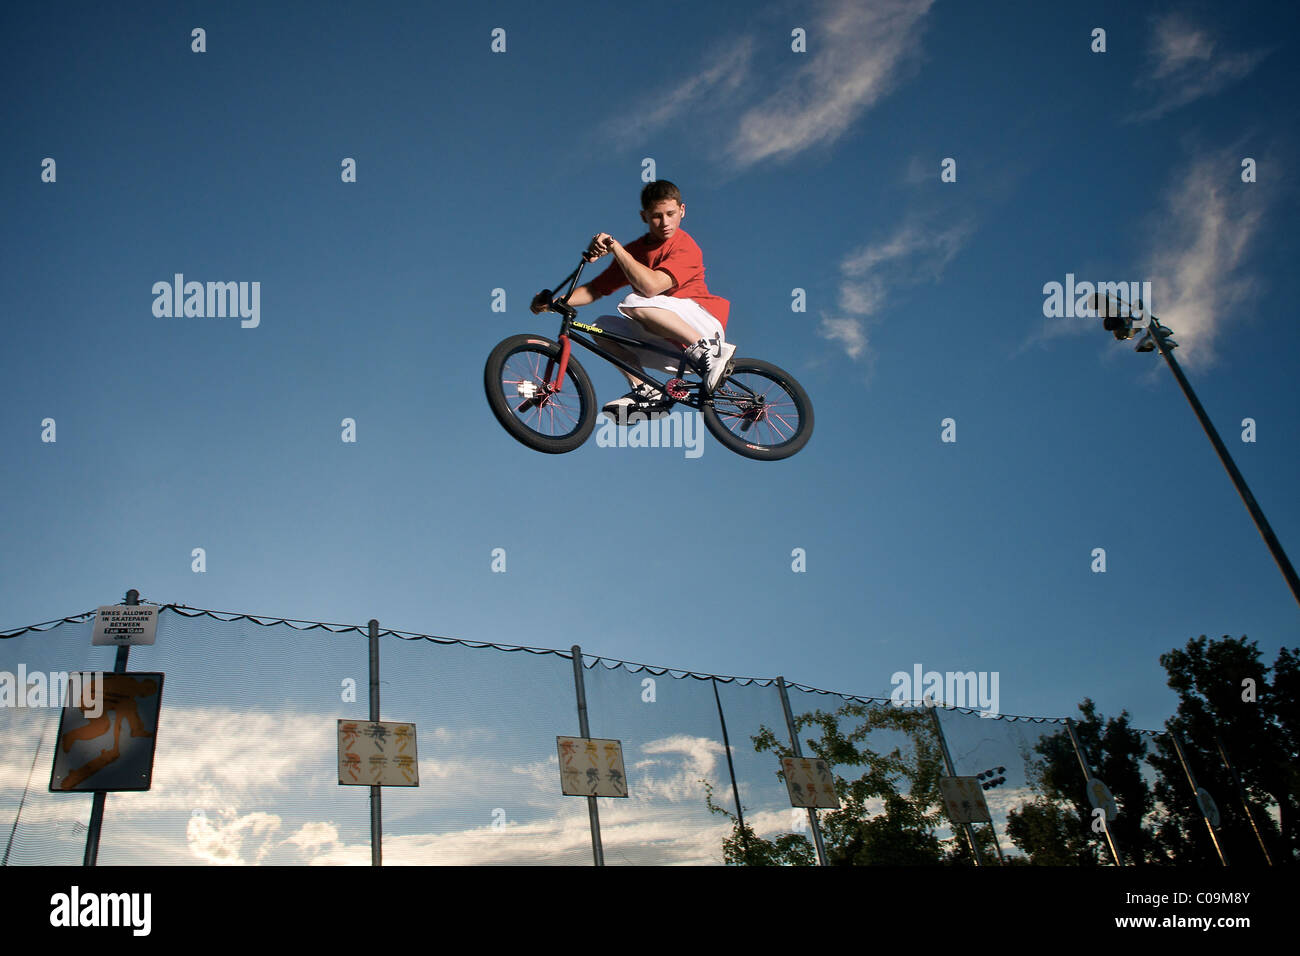 A male teen jumping on a bicycle. Stock Photo